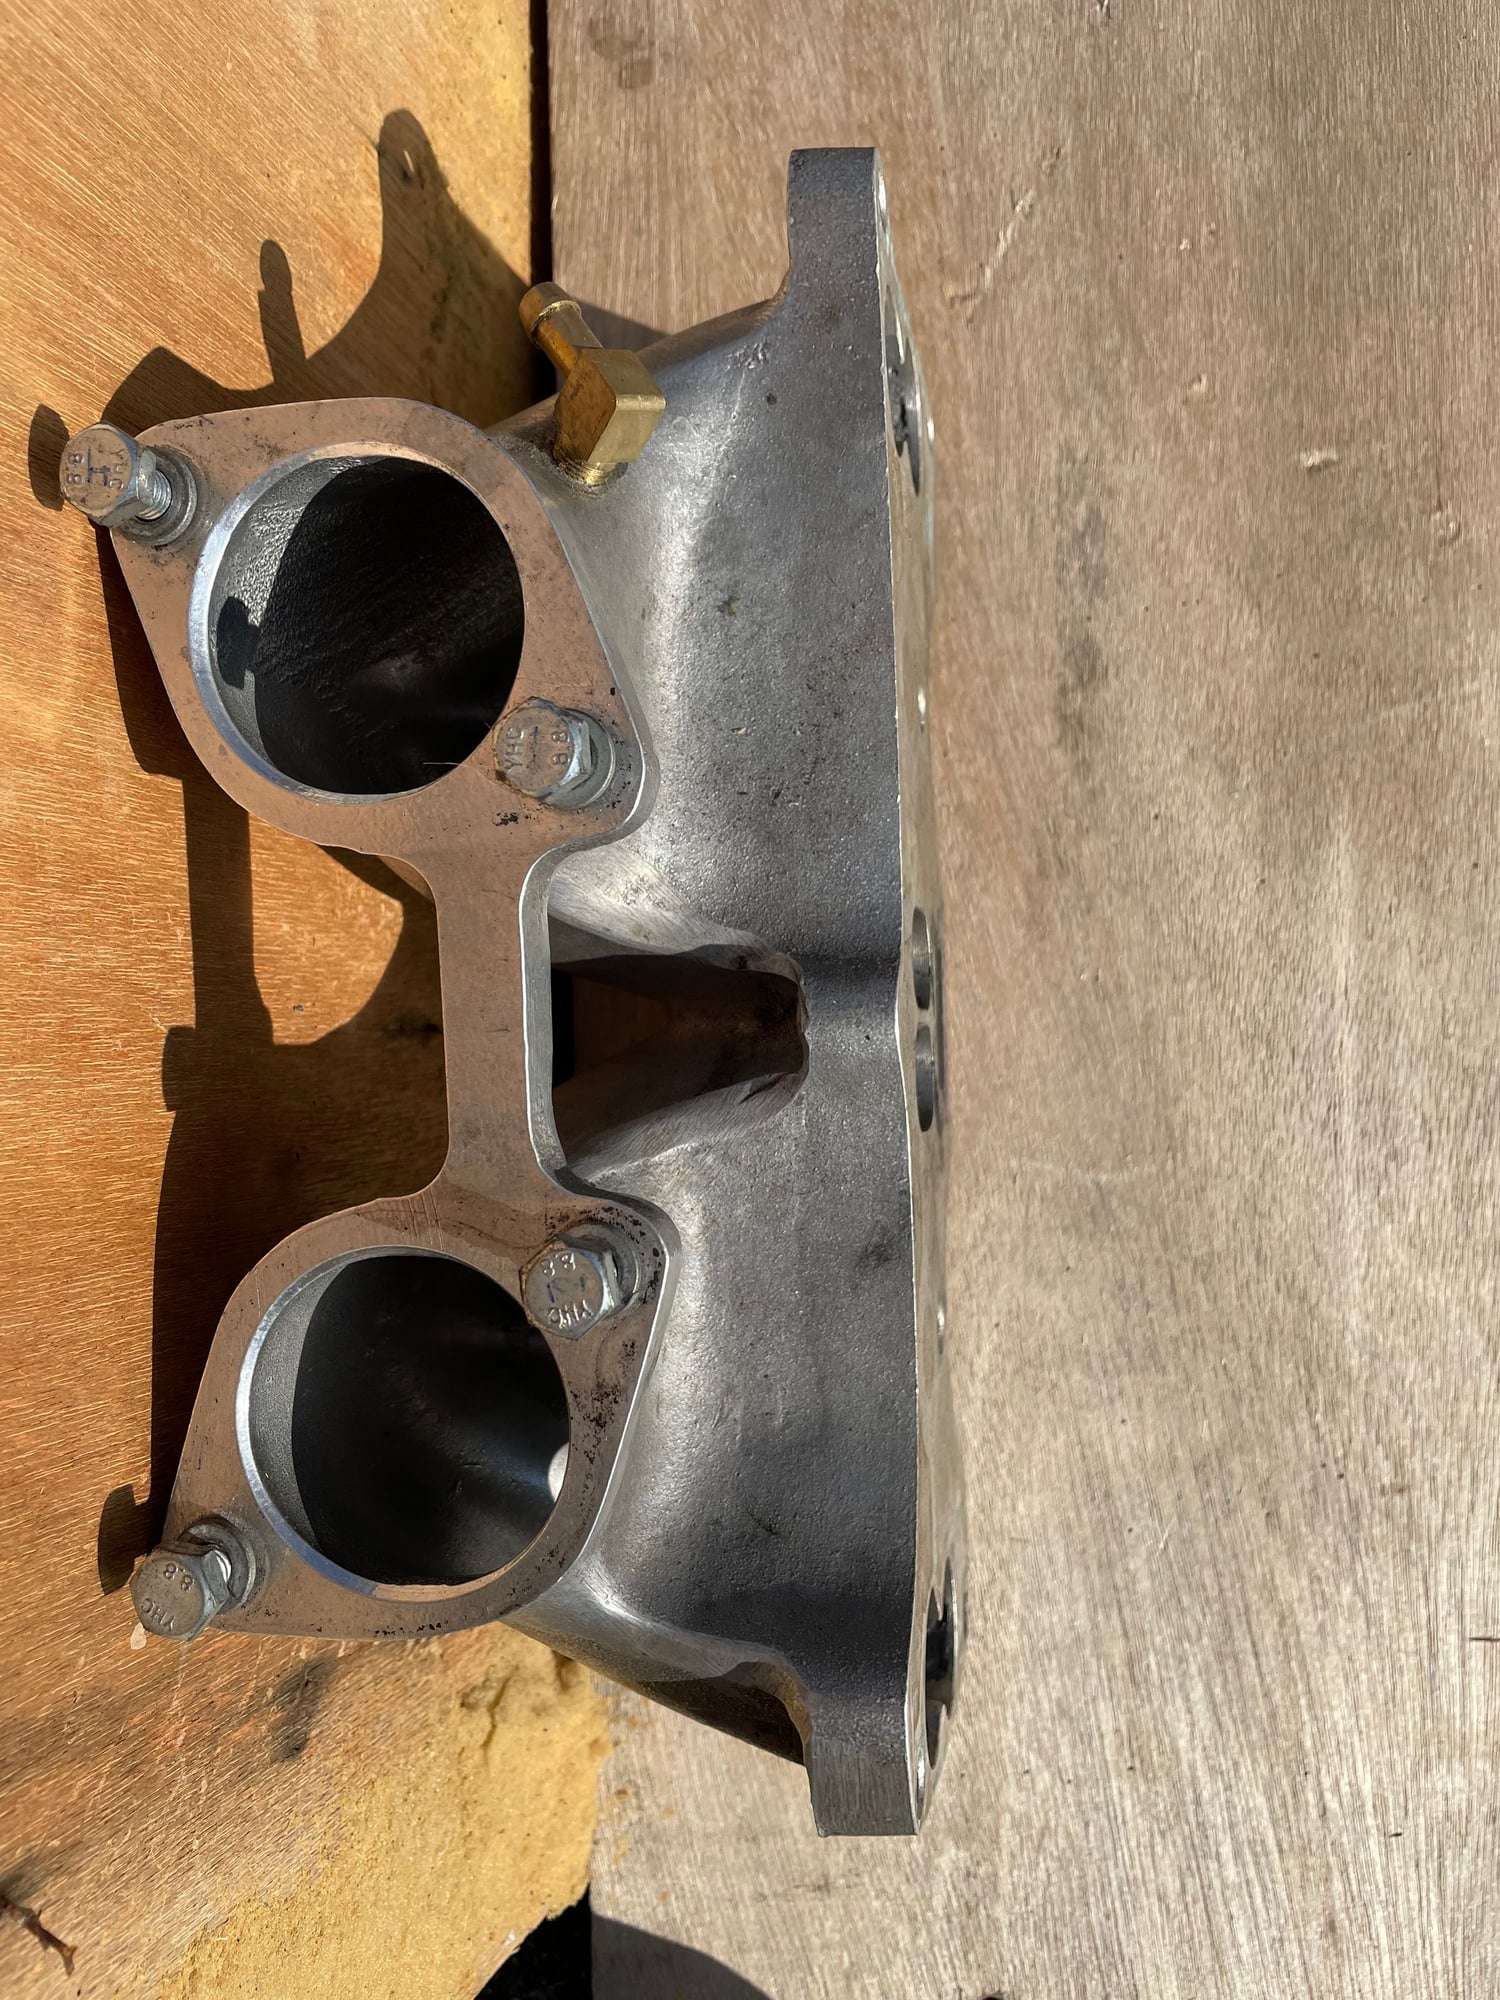 Engine - Intake/Fuel - 6 Port Racing Beat Weber/Throttle Body Down Draft Intake Manifold - Used - 1984 to 1991 Mazda RX-7 - Chicago, IL 60641, United States